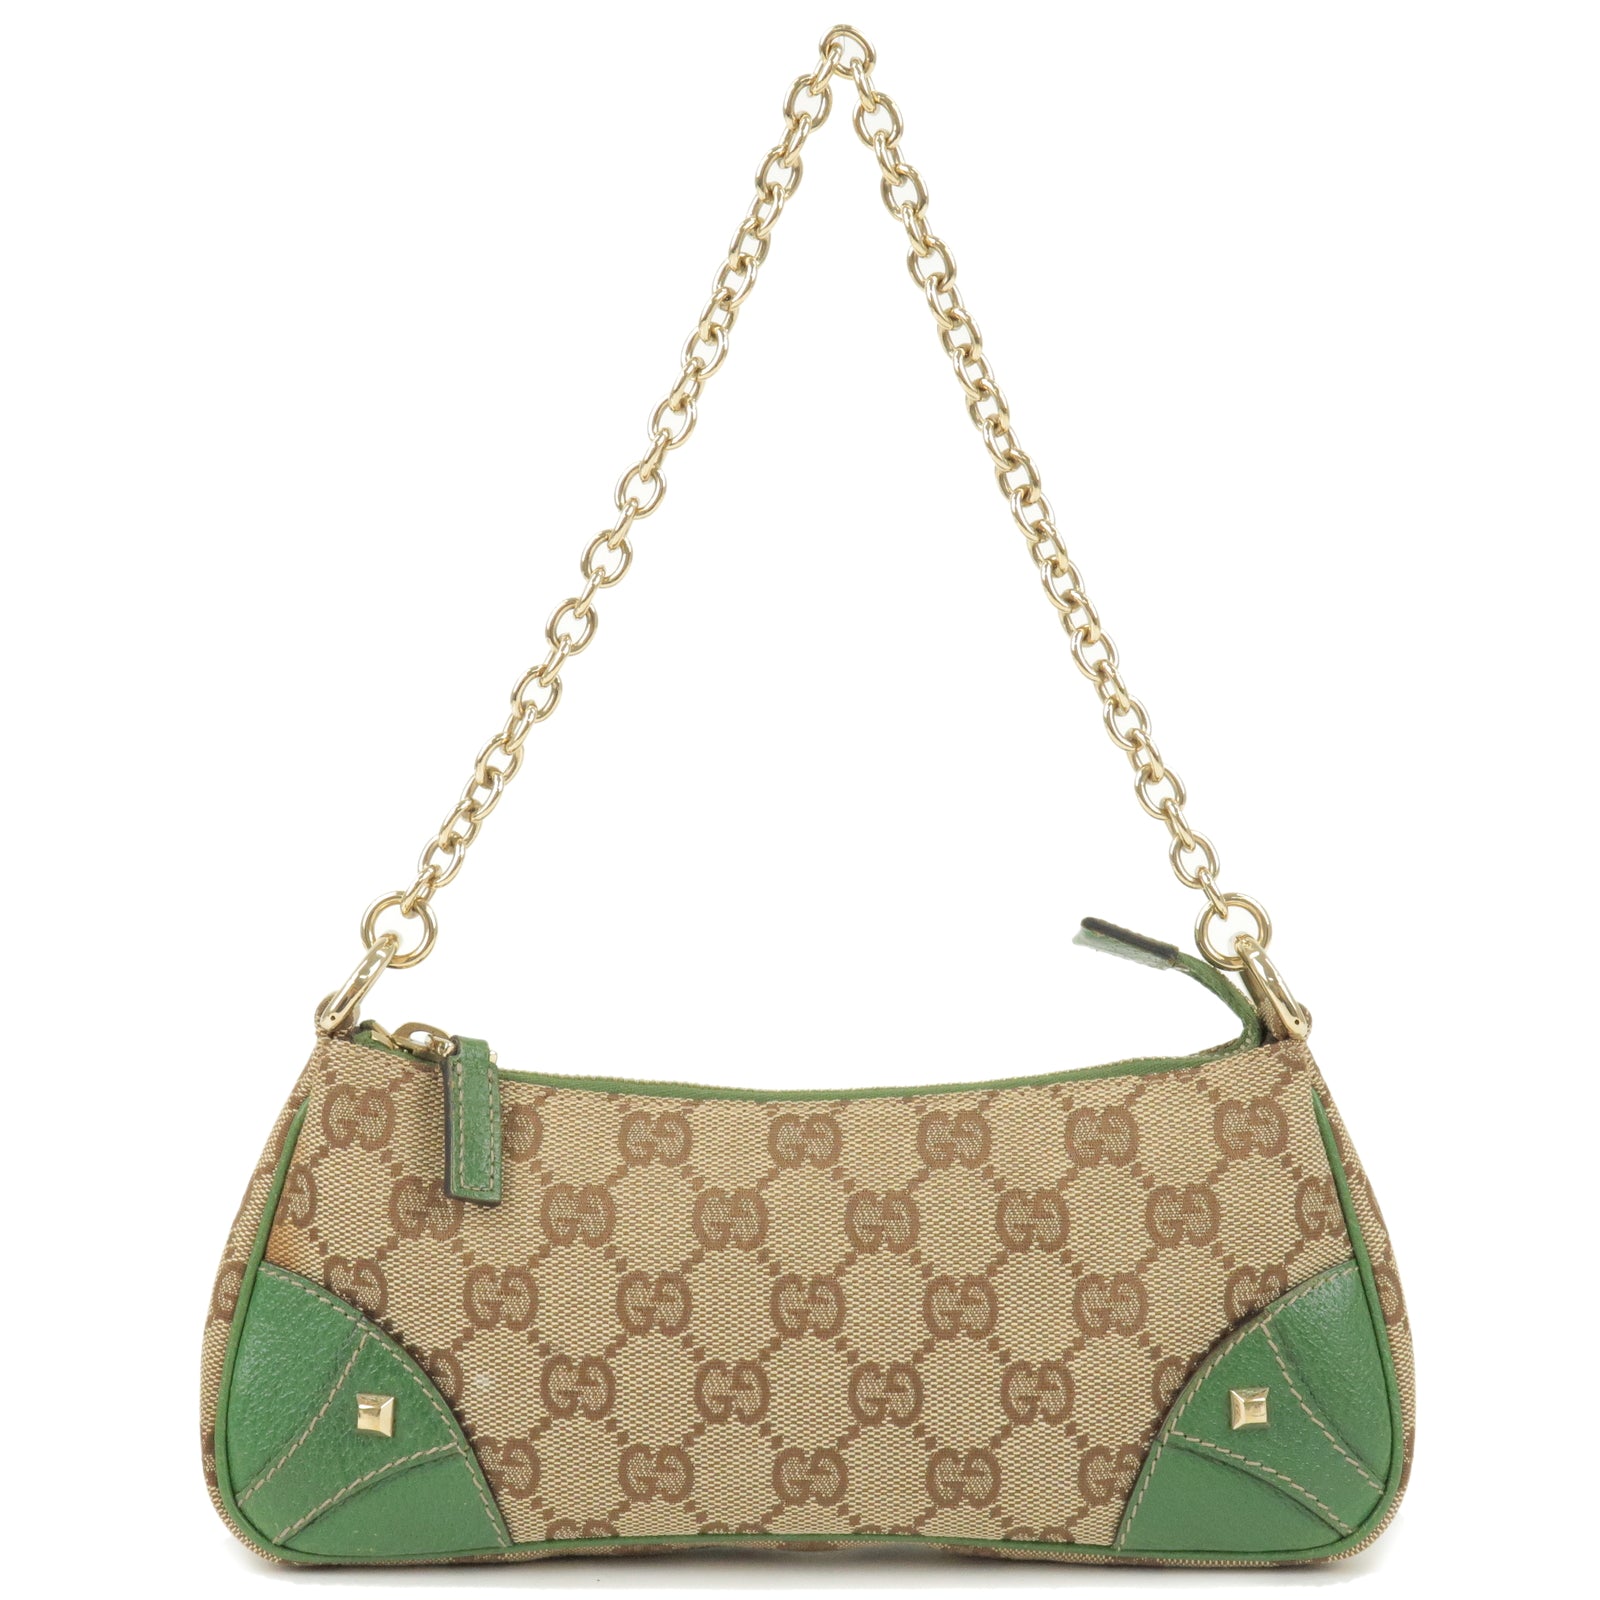 GUCCI-GG-Canvas-Leather-Studs-Chain-Shoulder-Bag-Green-120940